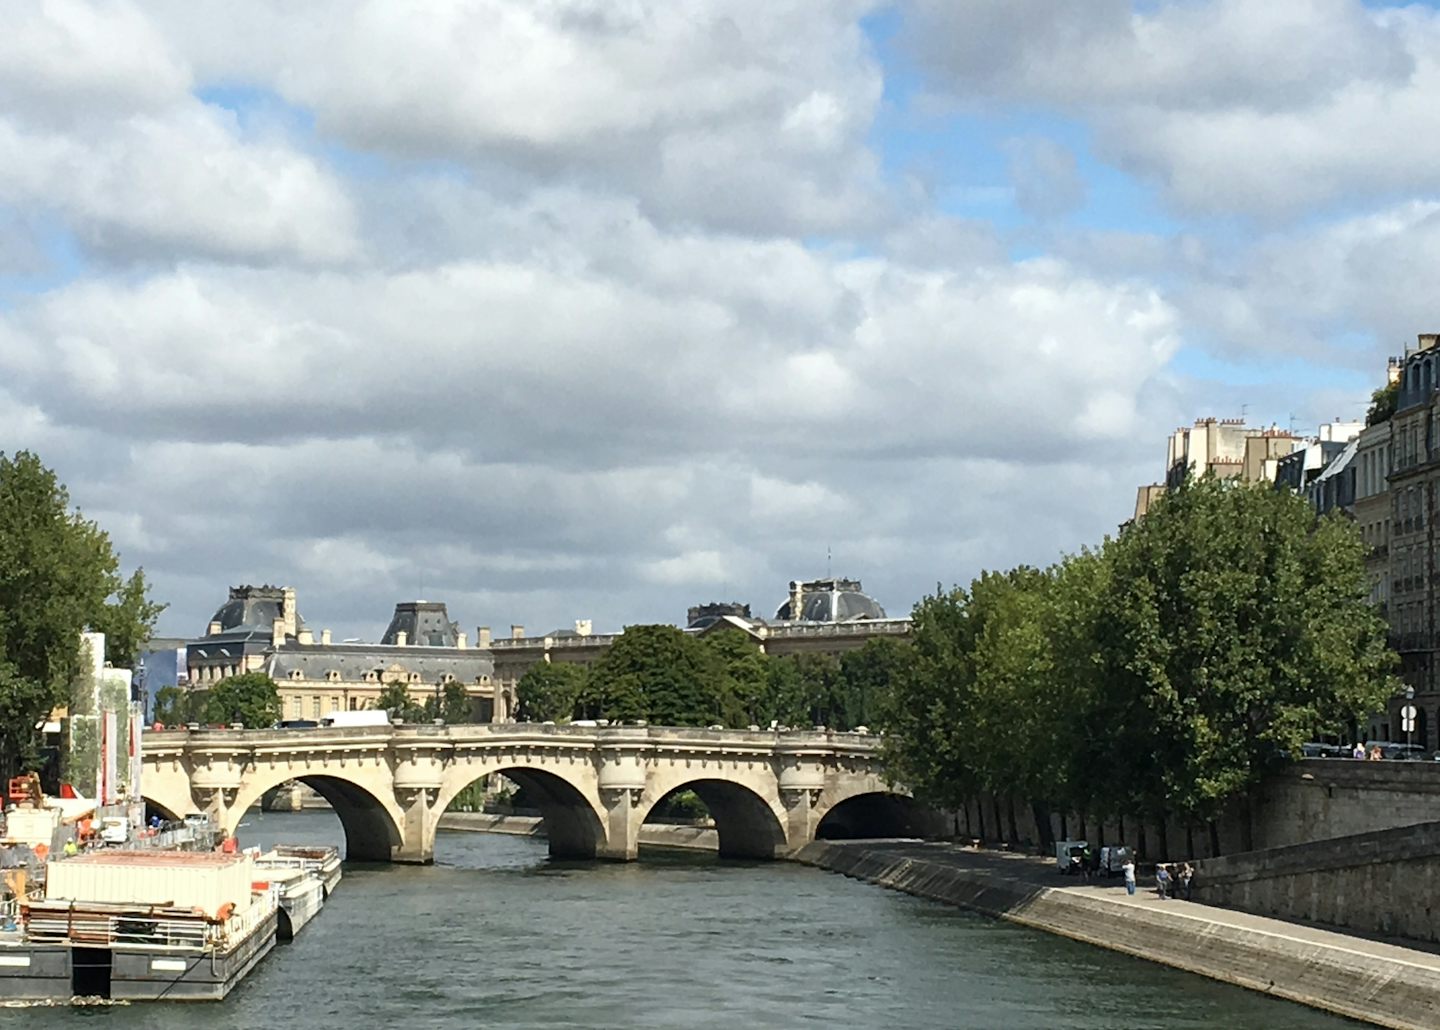 Strolling along the Seine